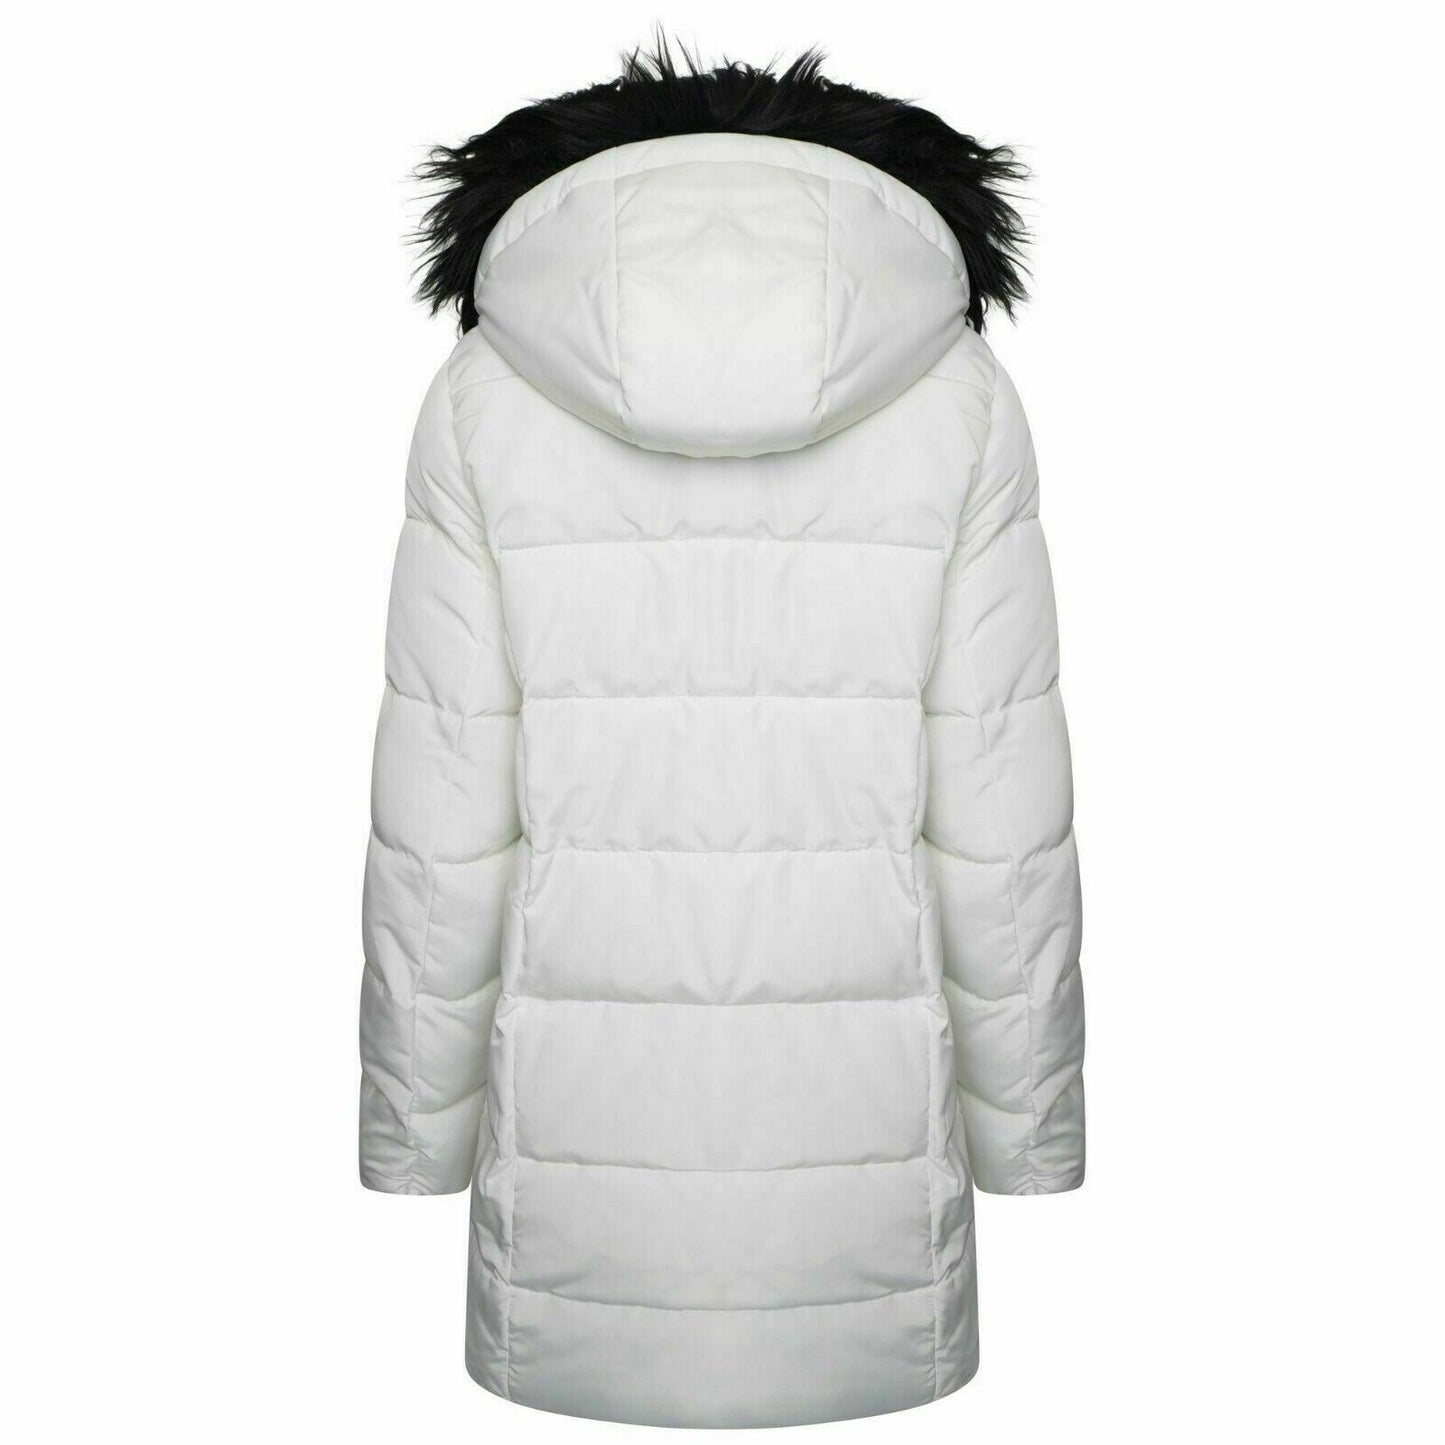 WOMENS QUILTED WARM HOODED WINTER PADDED JACKET ZIP WATER REPELLENT PUFFA COAT